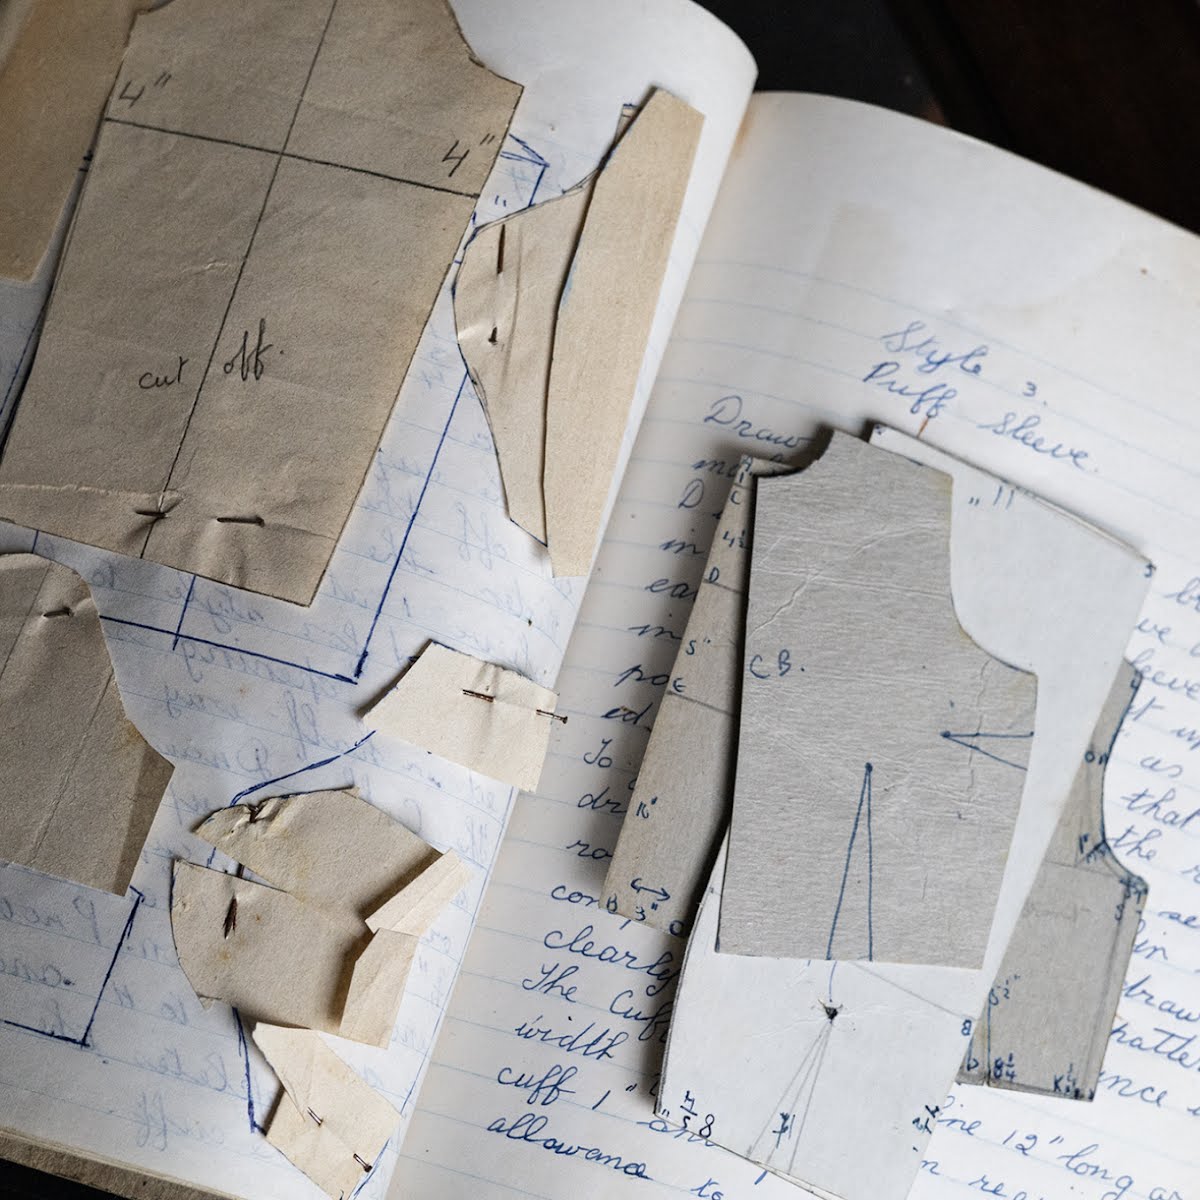 Ruth O’Connor explores her mother's old fashion journals. Photo: Marlene Wessels